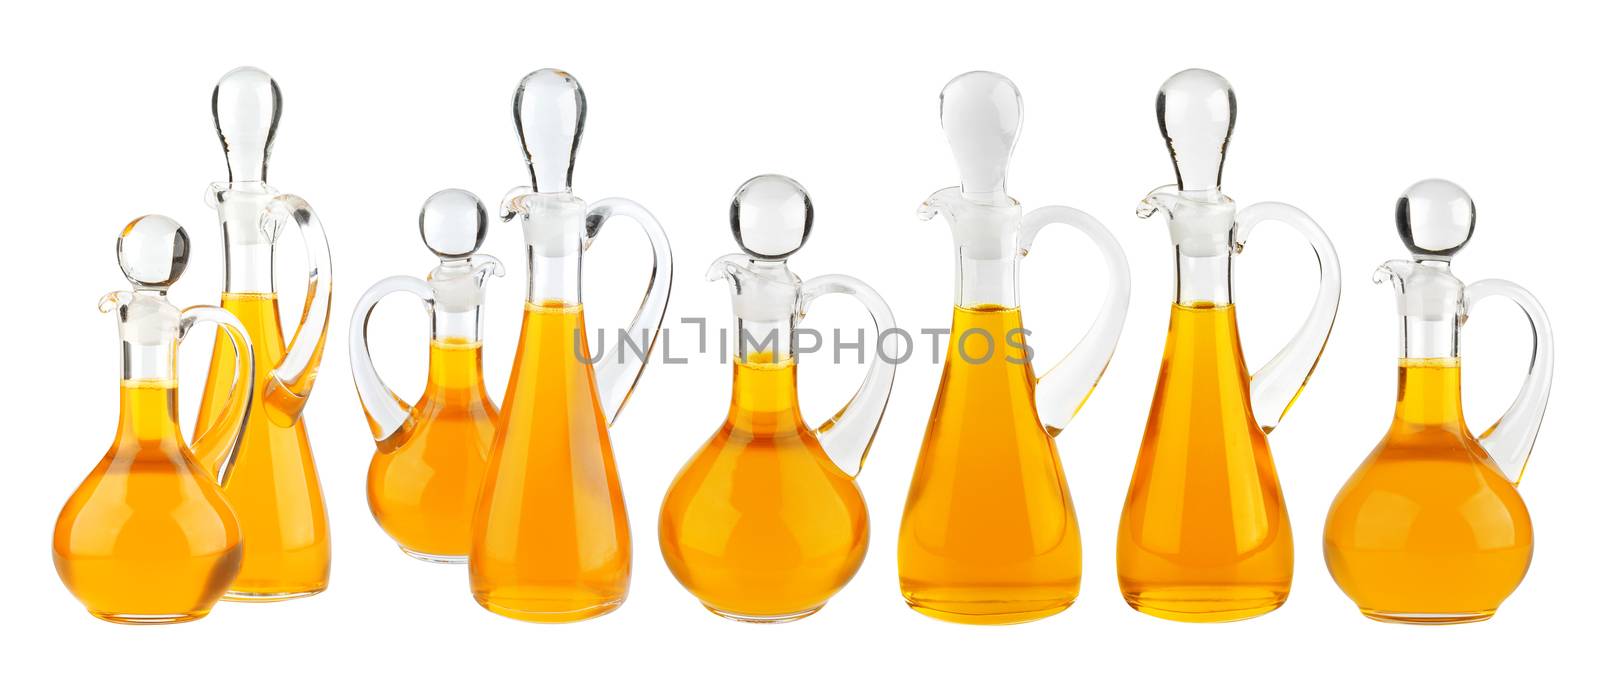 Vegelable oil isolated on white background. Collection by xamtiw